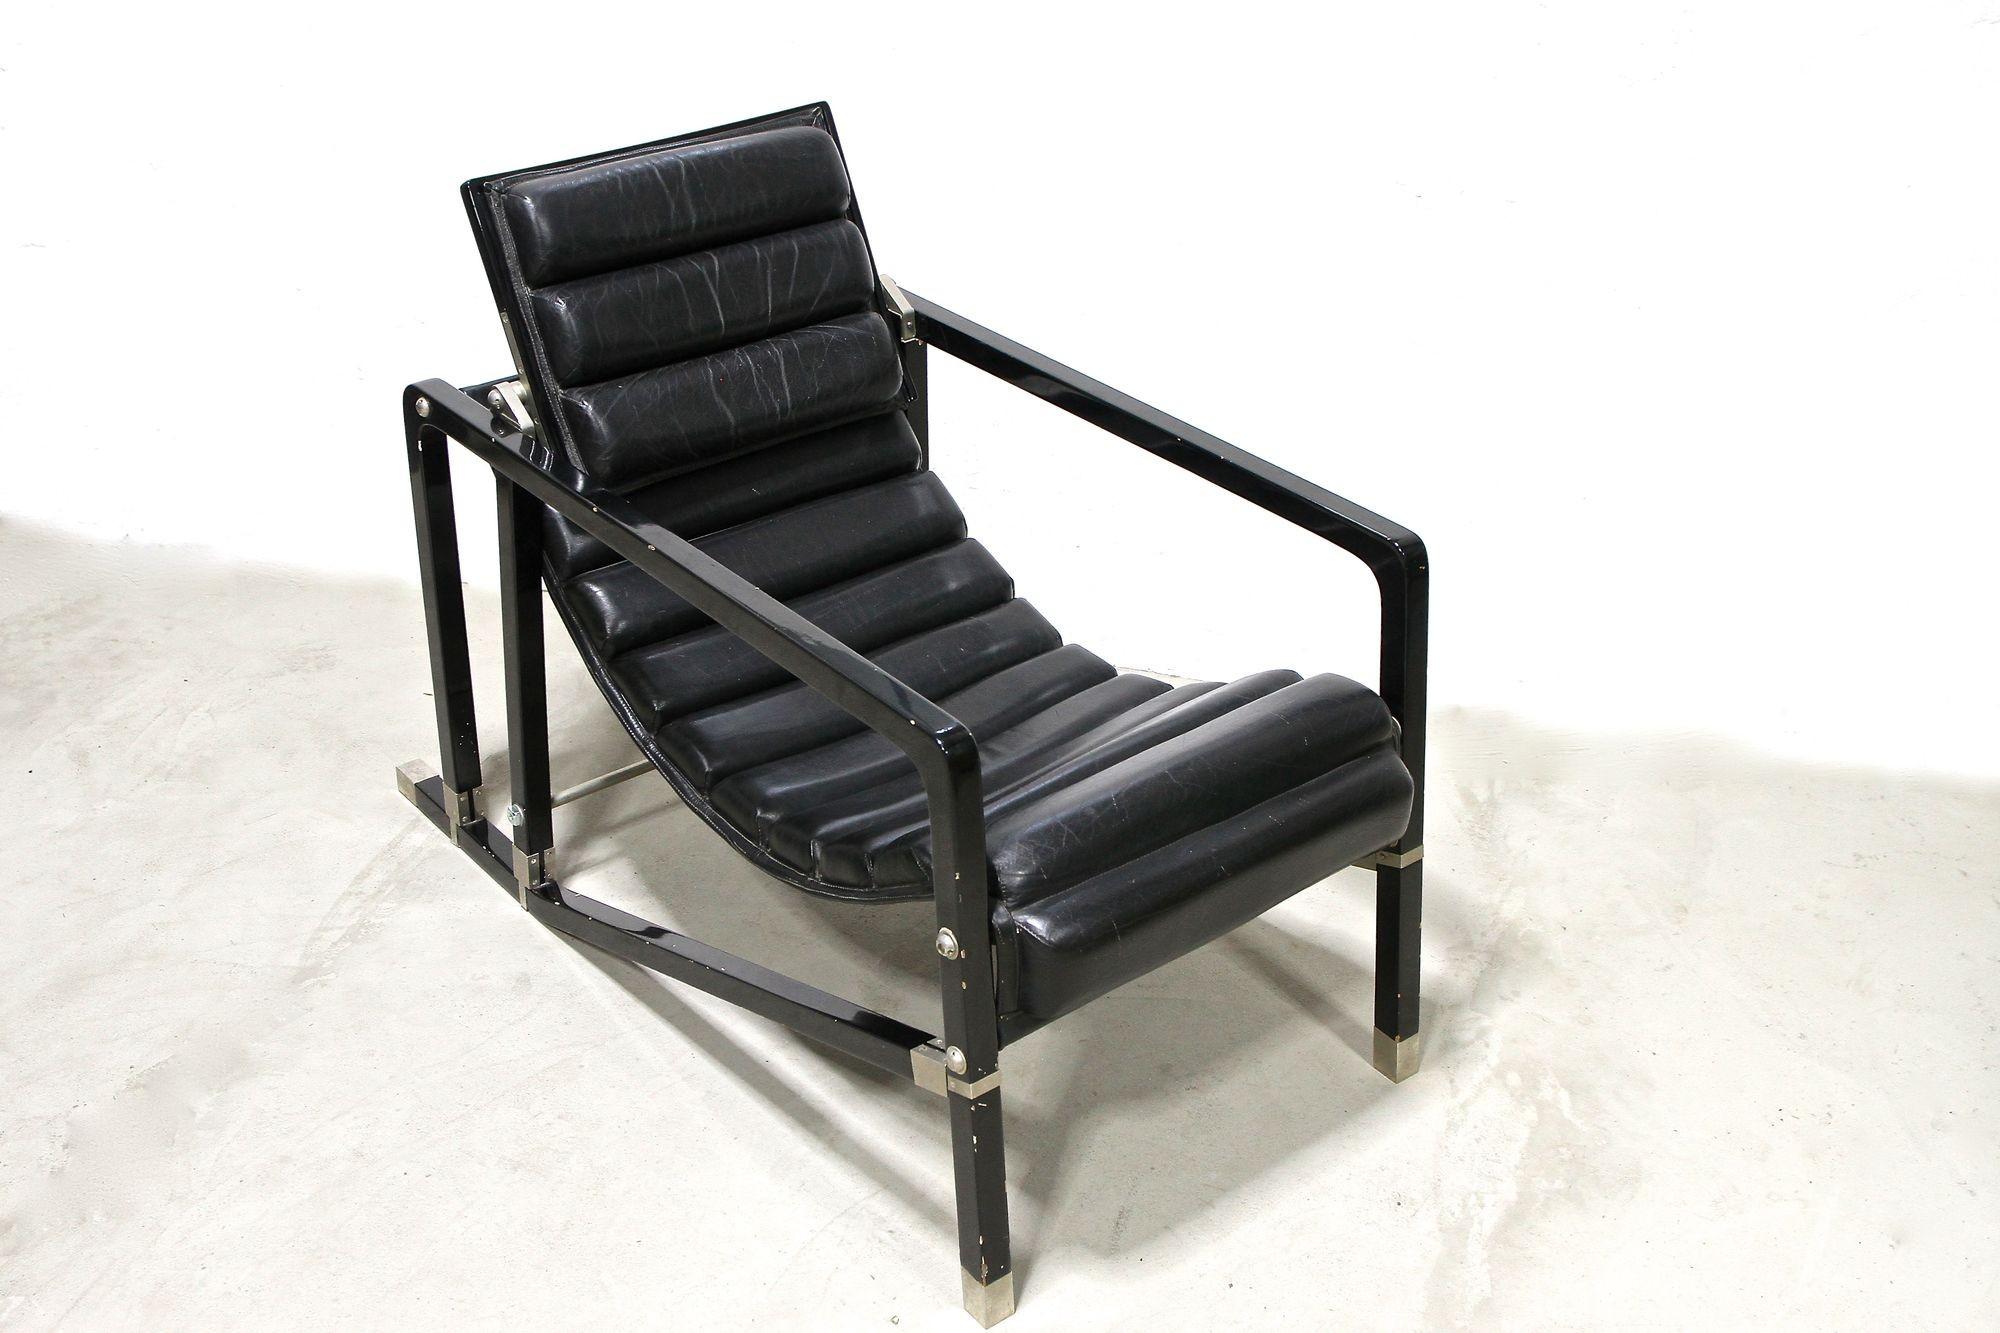 Transat Chair With Black Leather, Design Eileen Gray 1927, France ca. 1975 For Sale 10